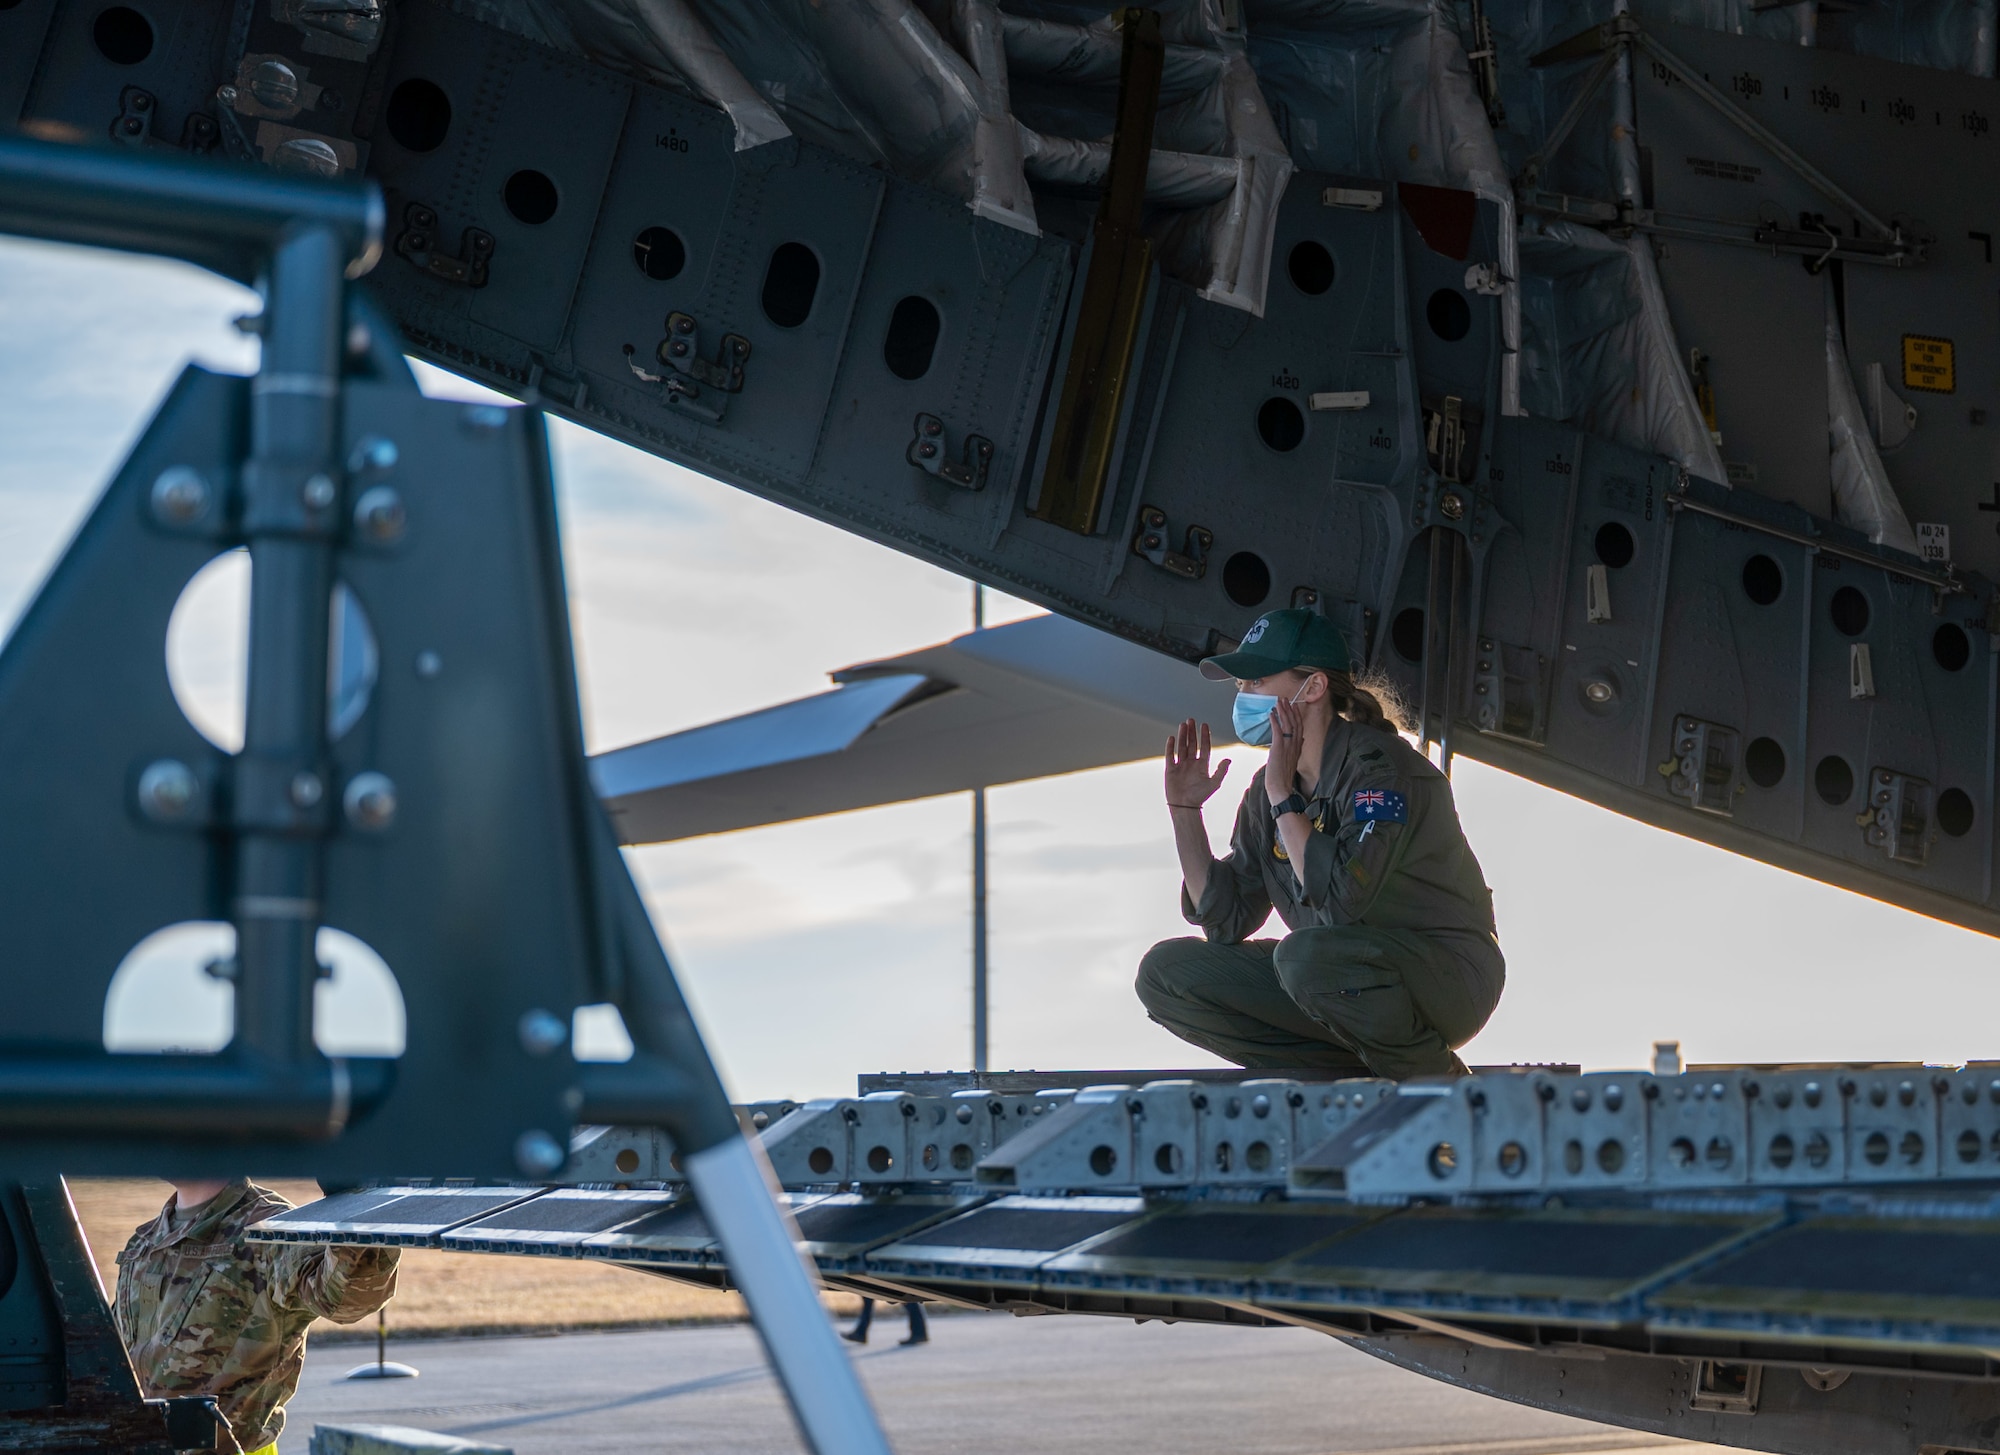 Sgt. Madison Cave-Freeman, Royal Australian Air Force 36th Squadron loadmaster, marshals a K-loader to the ramp of a RAAF C-17 Globemaster III at Dover Air Force Base, Del., March 13, 2021. The U.S. and Australia maintain a robust relationship underpinned by shared democratic values, common interests and cultural bonds. The U.S.–Australia alliance is an anchor for peace and stability in the Indo-Pacific region and around the world.